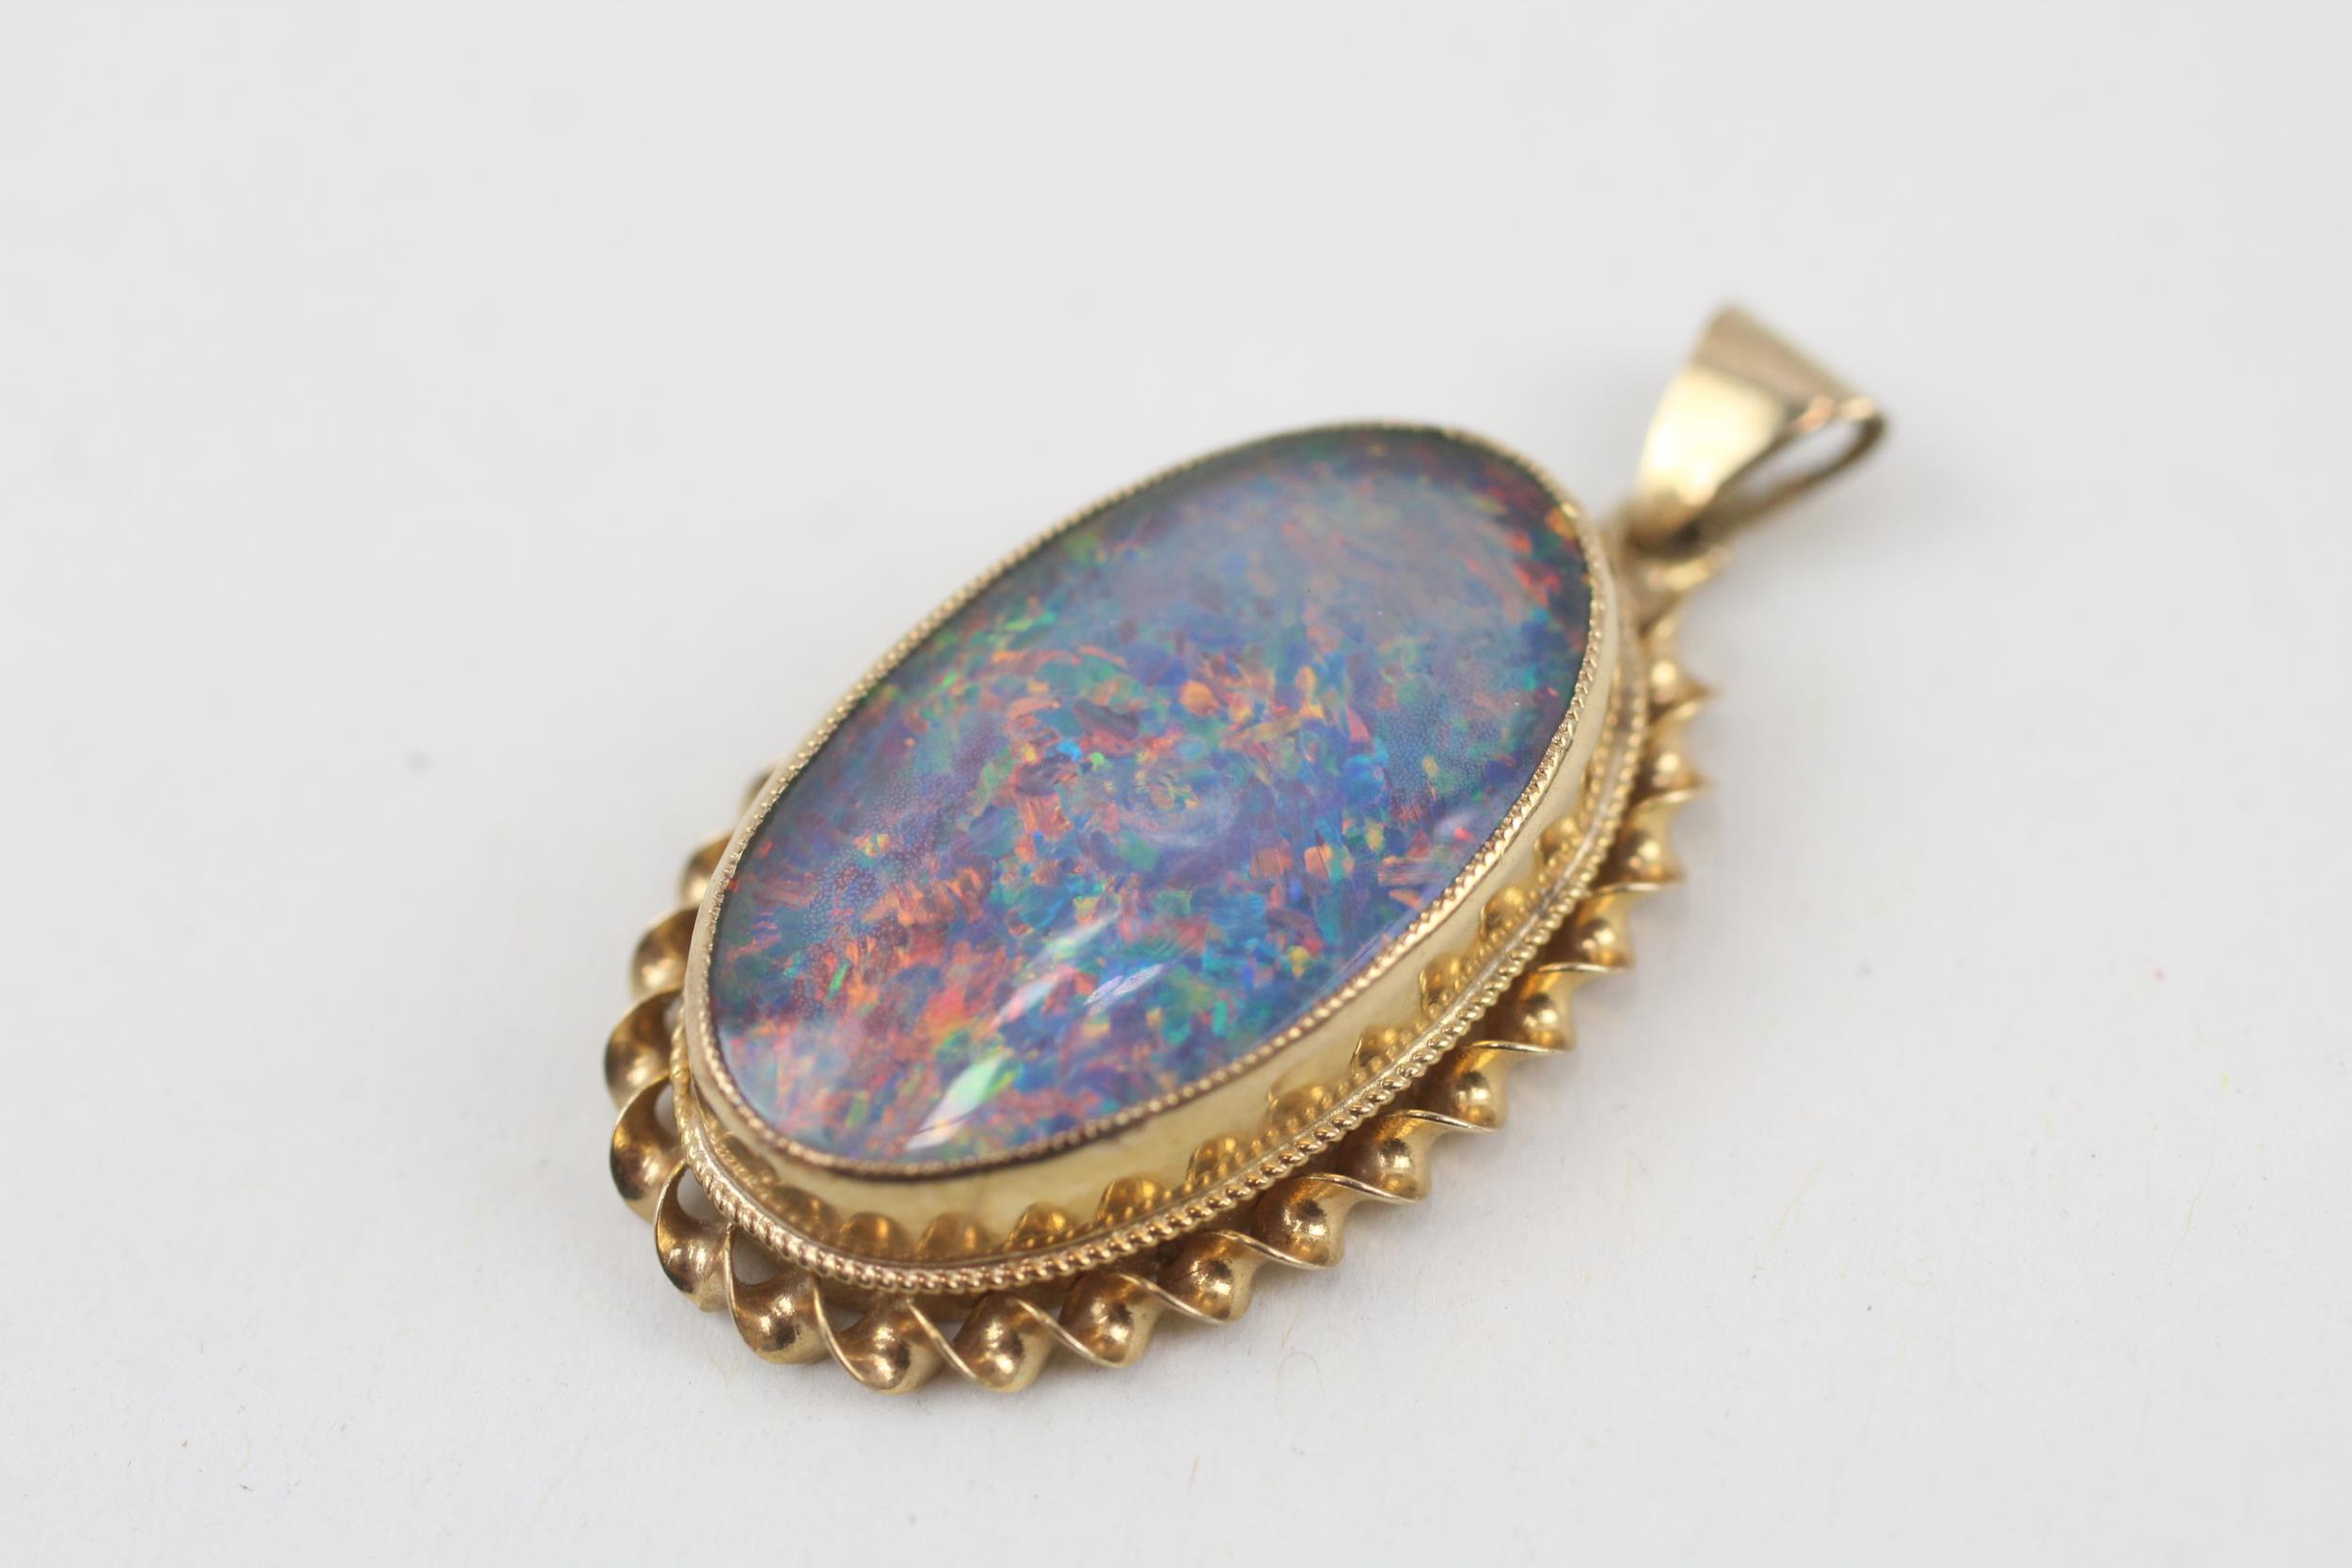 9ct gold oval opal triplet single stone pendant - 4.6 g - Image 2 of 7